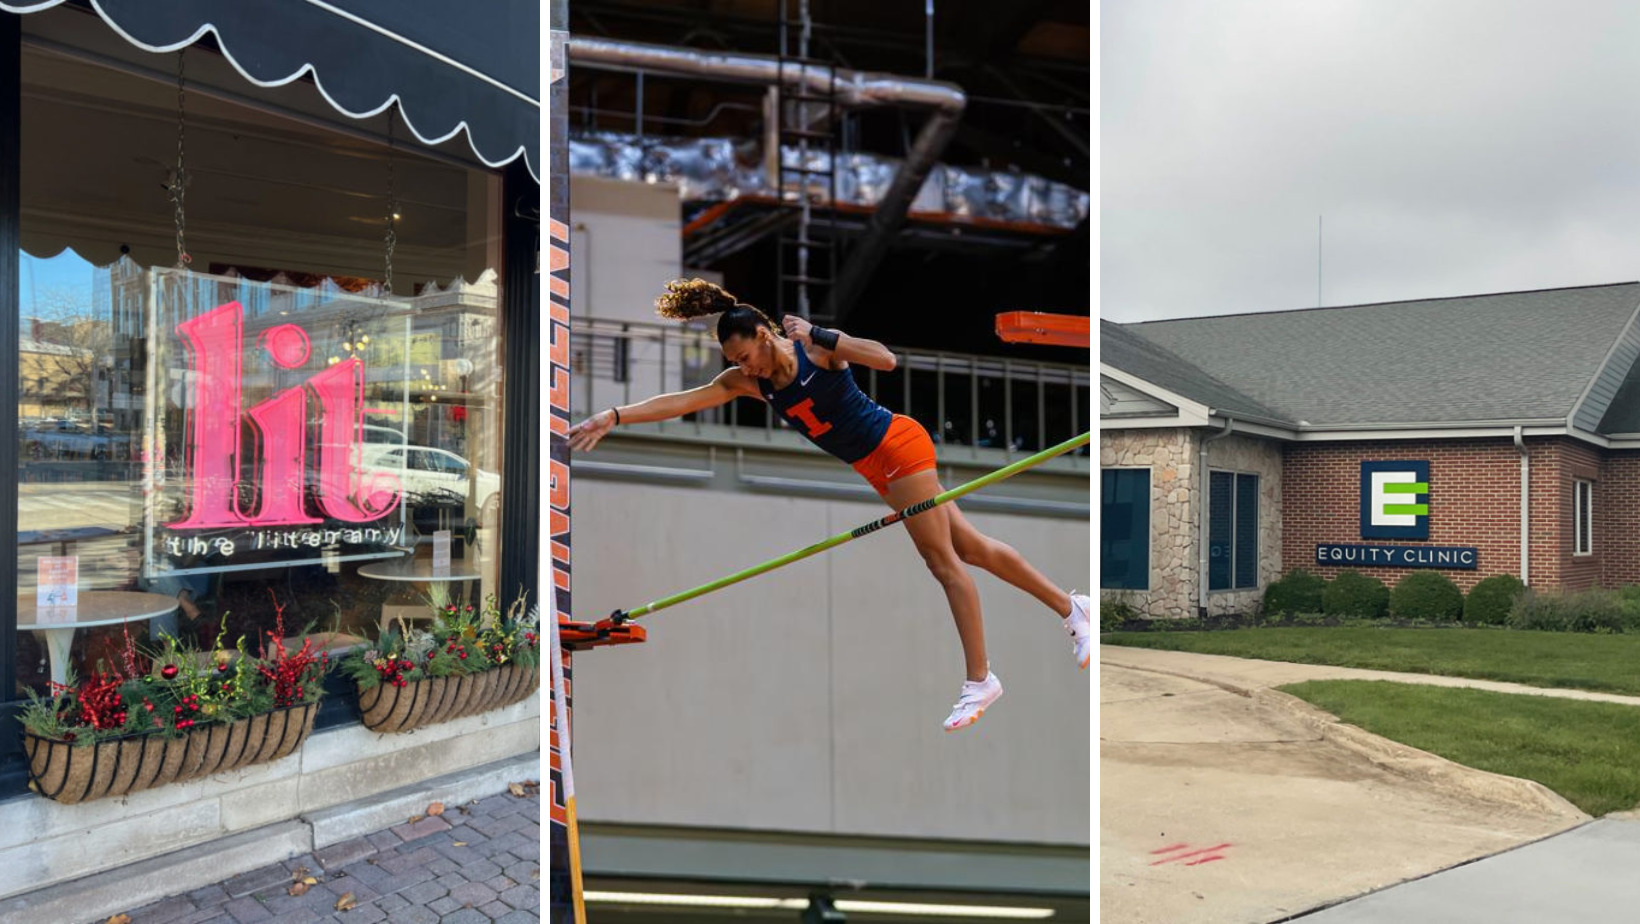 Left: The exterior of The Literary in Downtown Champaign. A neon pink sign that says "lit" hangs in a window. There are black awnings over the windows, and planter boxes on the bottom of the windows. Center: Illinois Pole Vaulter Tori Thomas during the Illini Open at the Illinois Armory in Champaign, IL.She is mid air after vaulting over a bar. She wears a blue jersey with an orange I and orange shorts. Right: Equity Clinic is an abortion provider in Champaign. The brick building has stone detailing and covered entrance extending to the driveway. The sign is blue, white, and bright green, and says Equity Clinic.